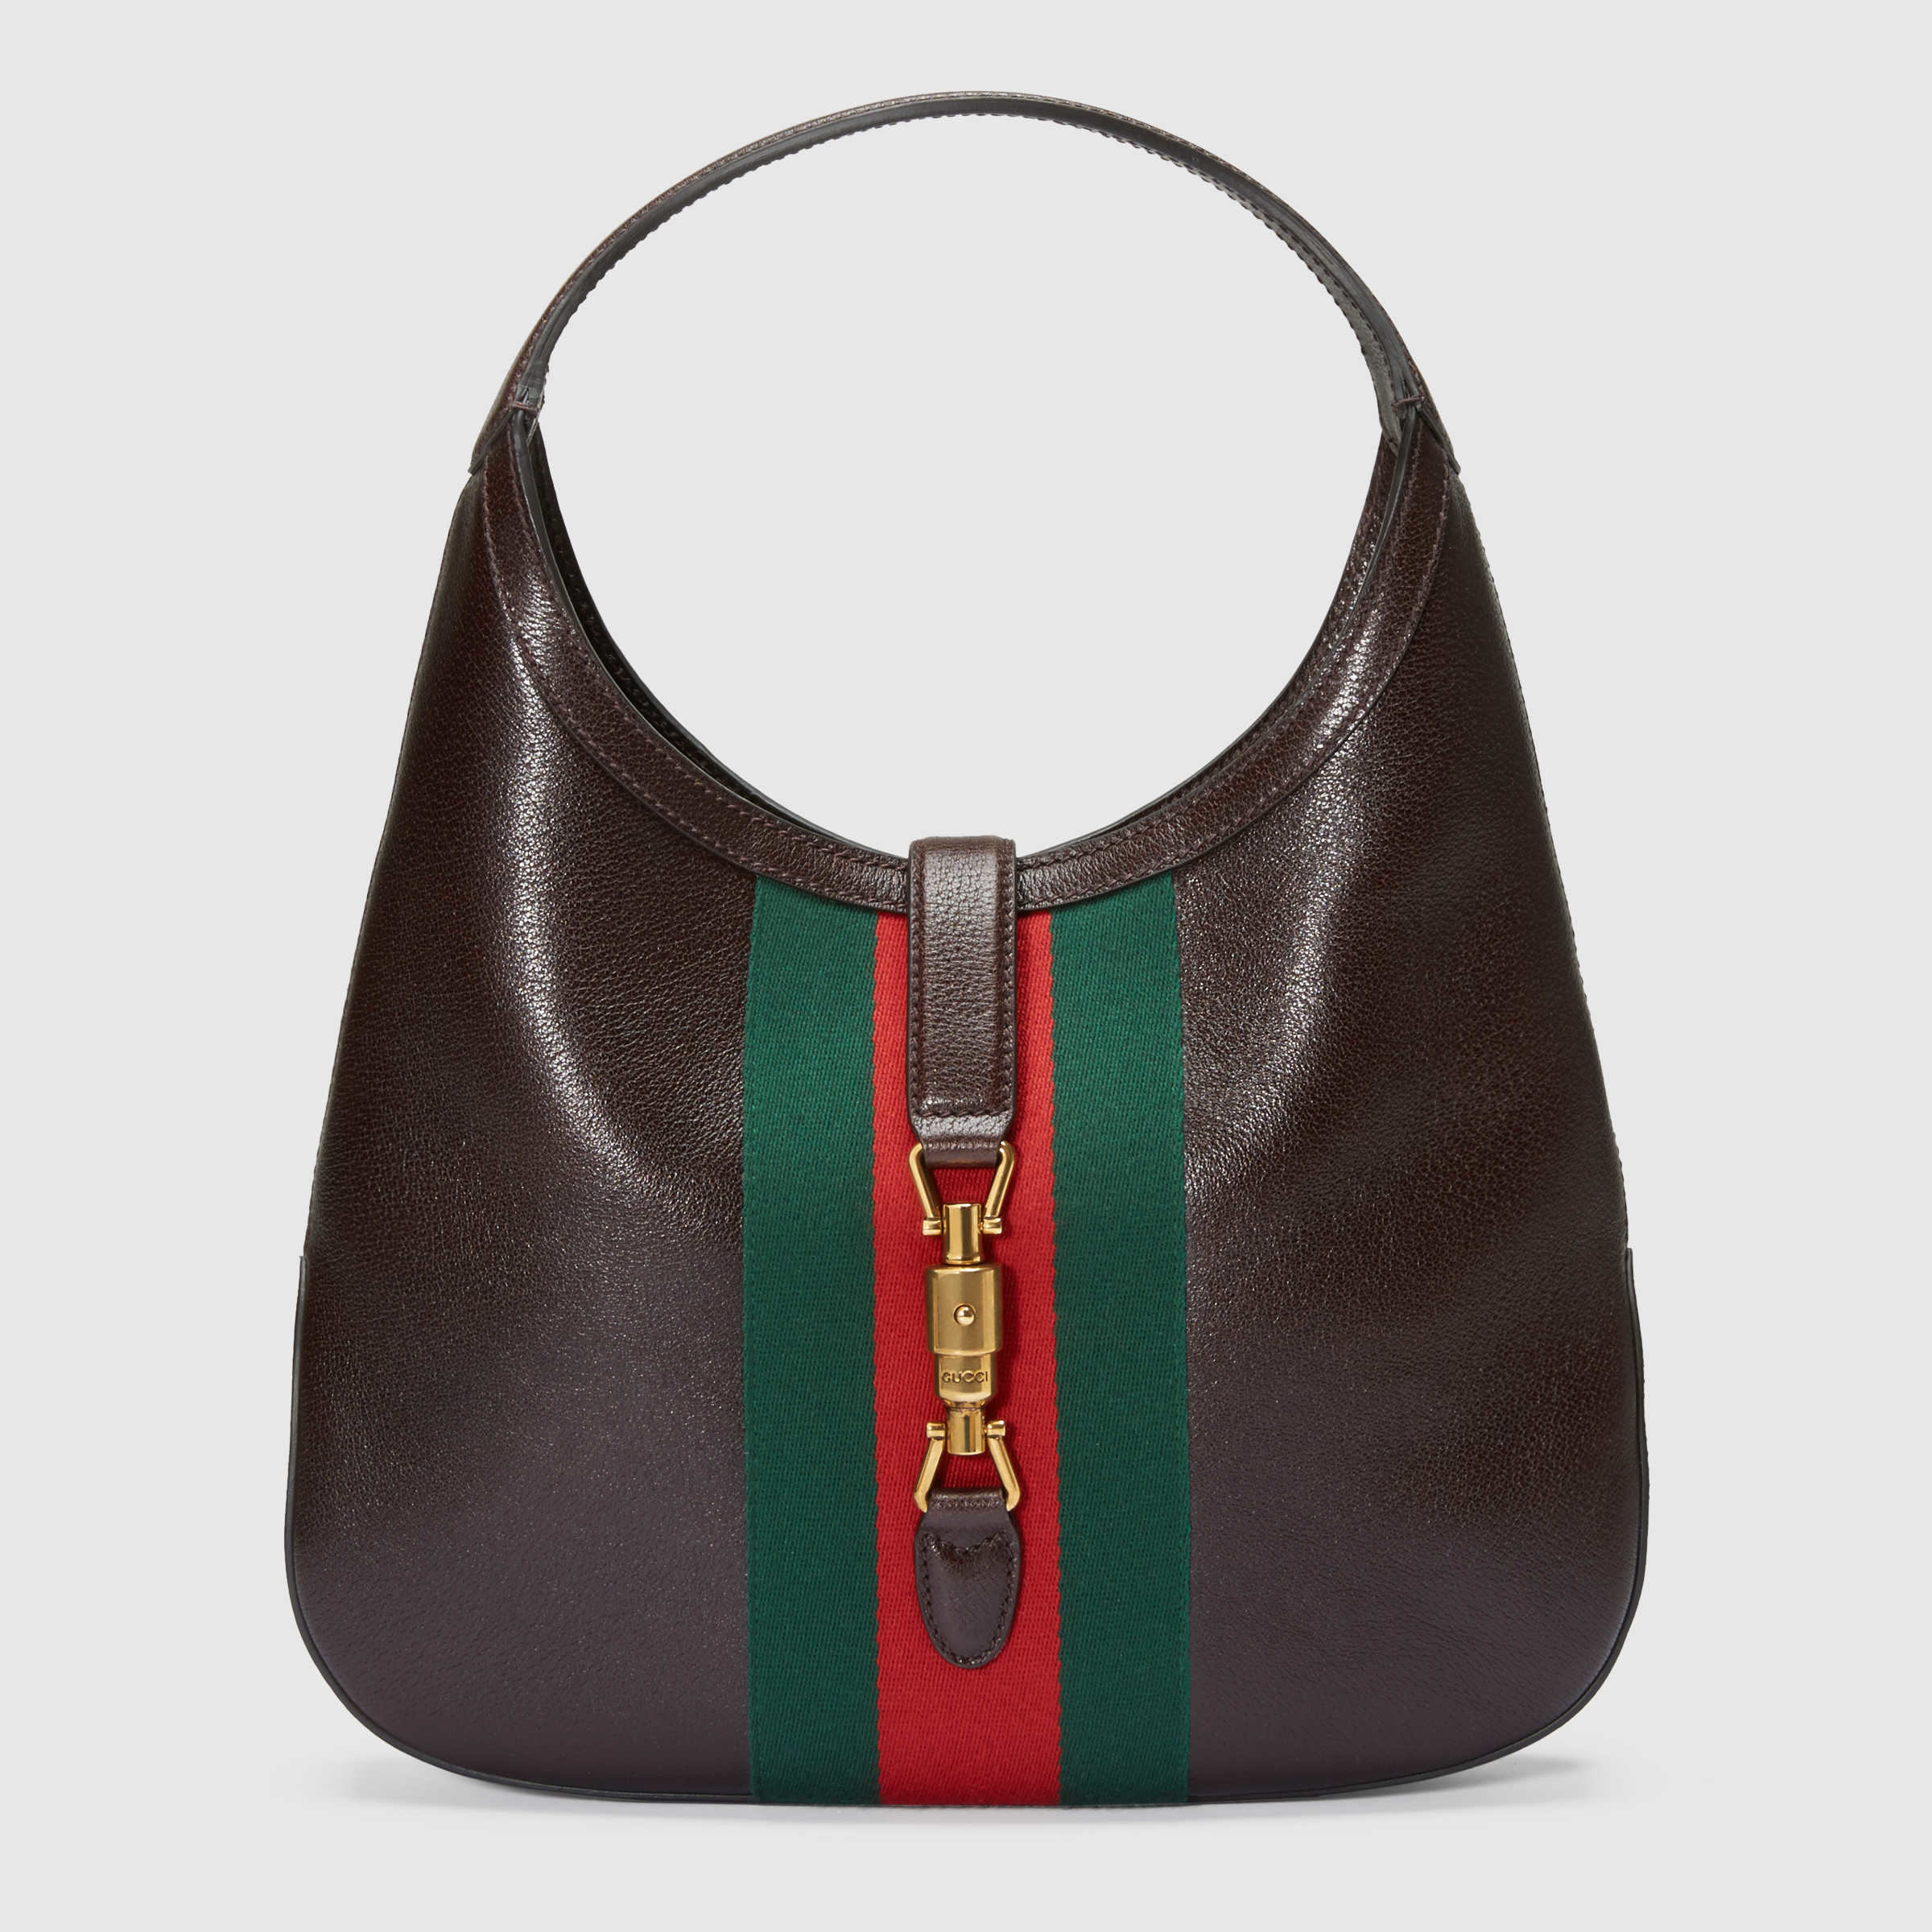 Gucci Jackie Soft Leather Hobo Bag in Brown - Lyst